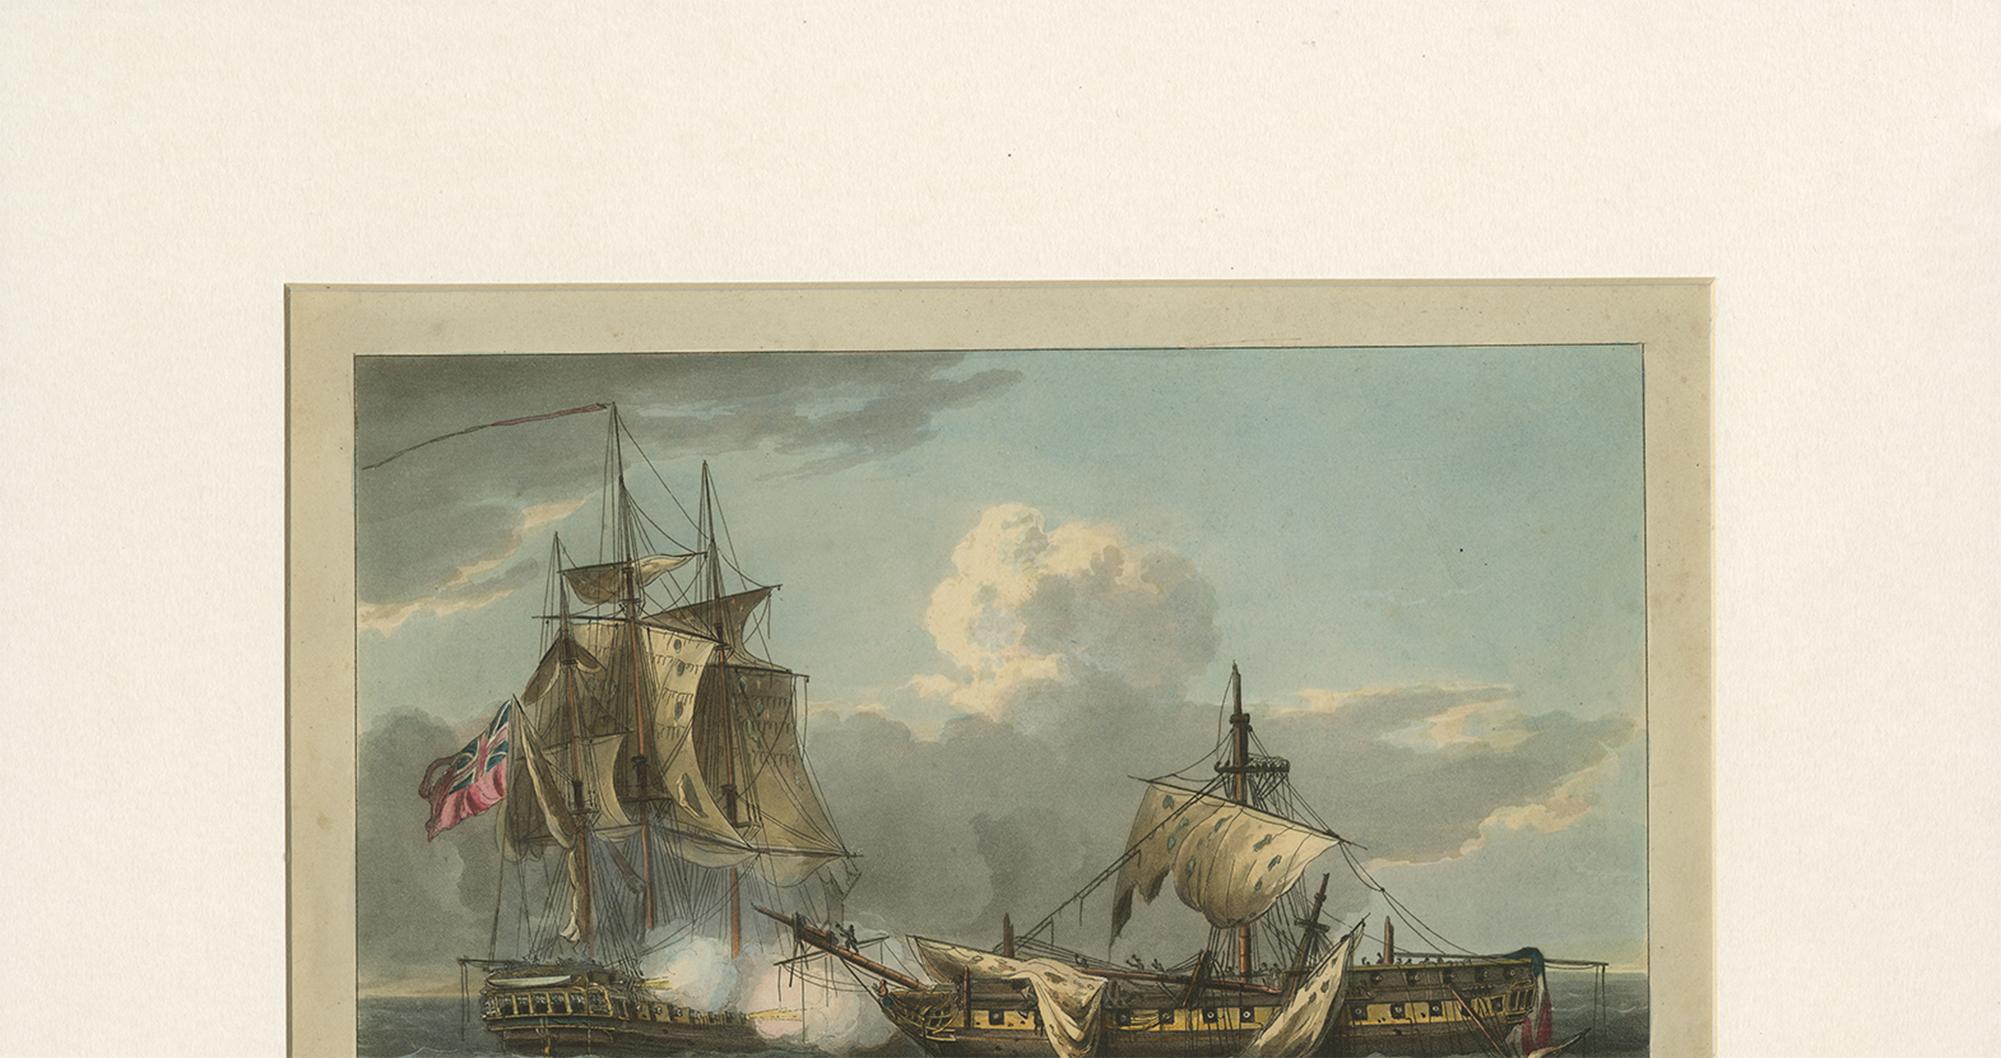 19th Century Antique Print of the Capture of La Vengeance by T. Sutherland, circa 1816